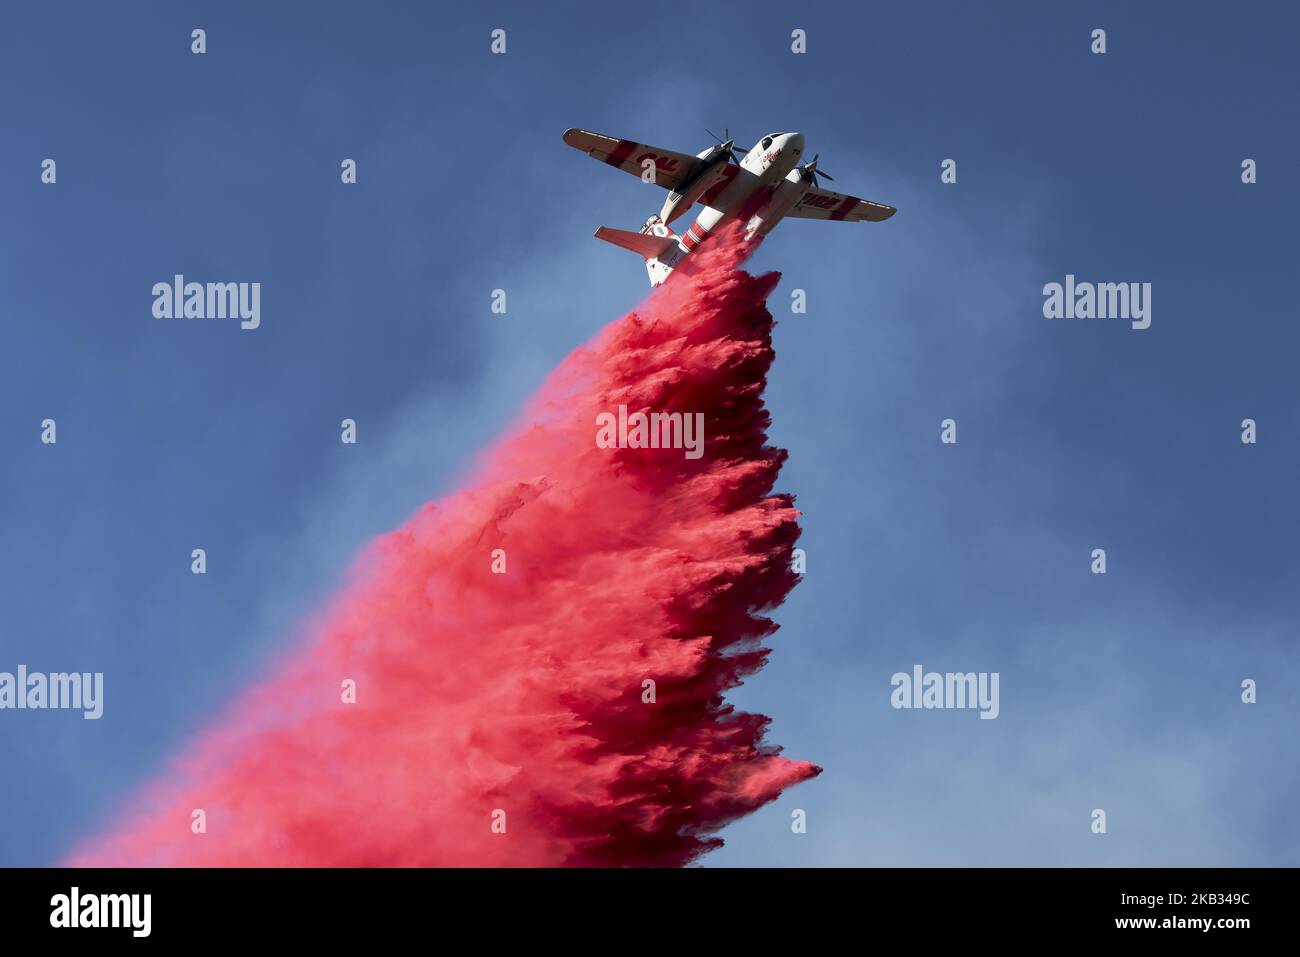 A plane drops fire retardant on the Woolsey Fire near Malibu, California on November 12, 2018 . The Woolsey fire has burned more than 143 square miles and evacuation orders were issued to 265,000 people in Los Angeles and Ventura counties (Photo by Ronen Tivony/NurPhoto) Stock Photo